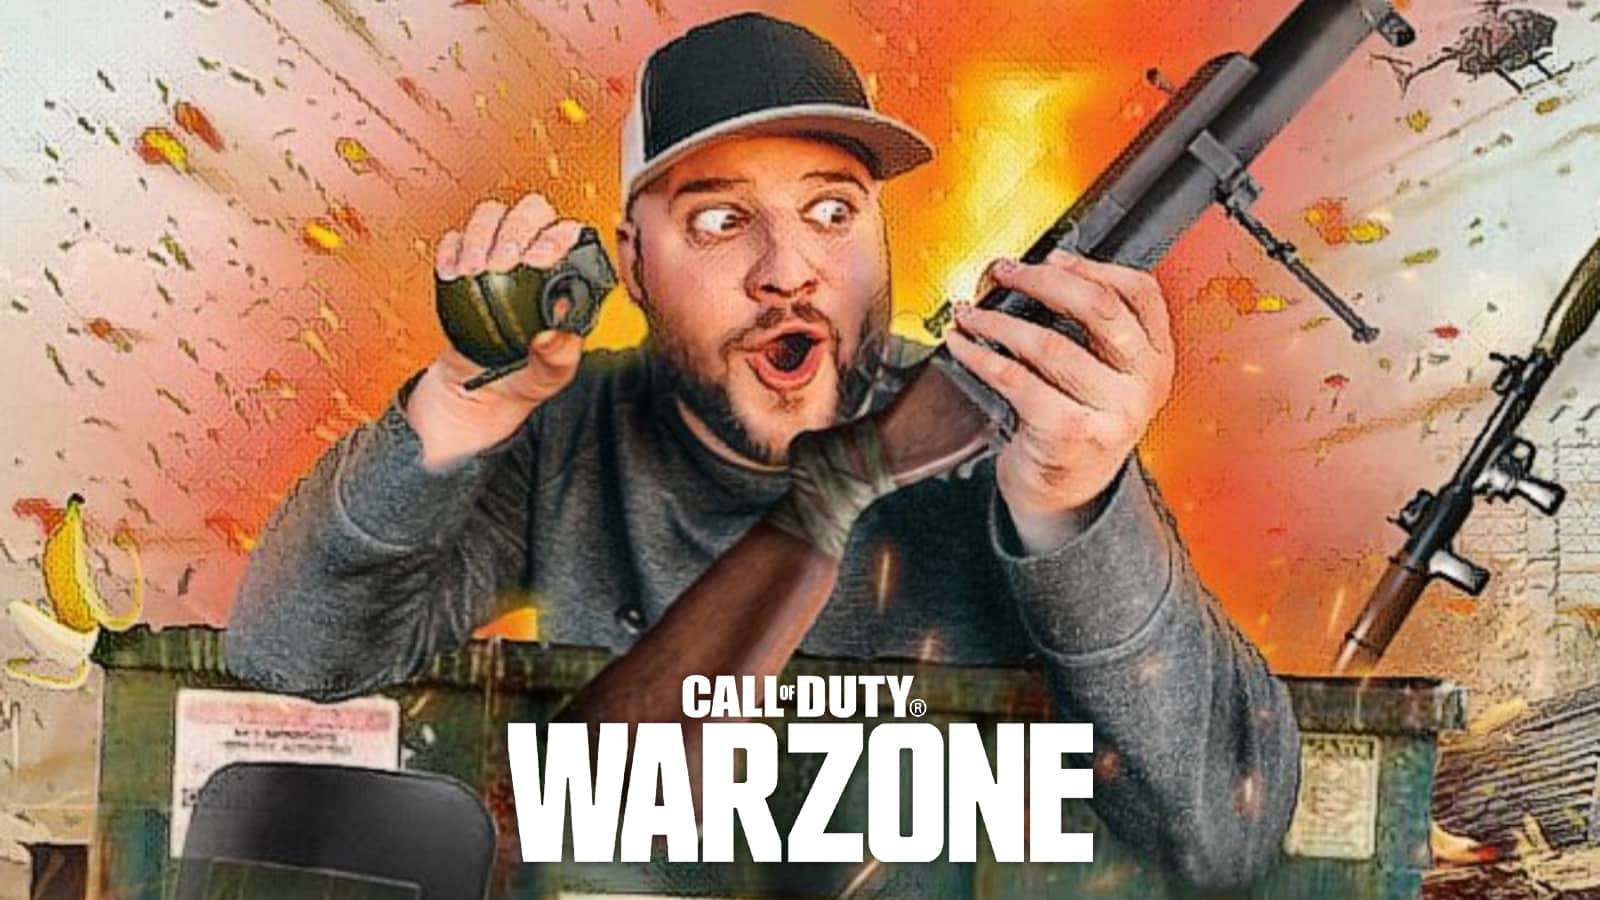 How to watch LEGIQN $30K Warzone Dumpster Derby tournament: stream, teams, format